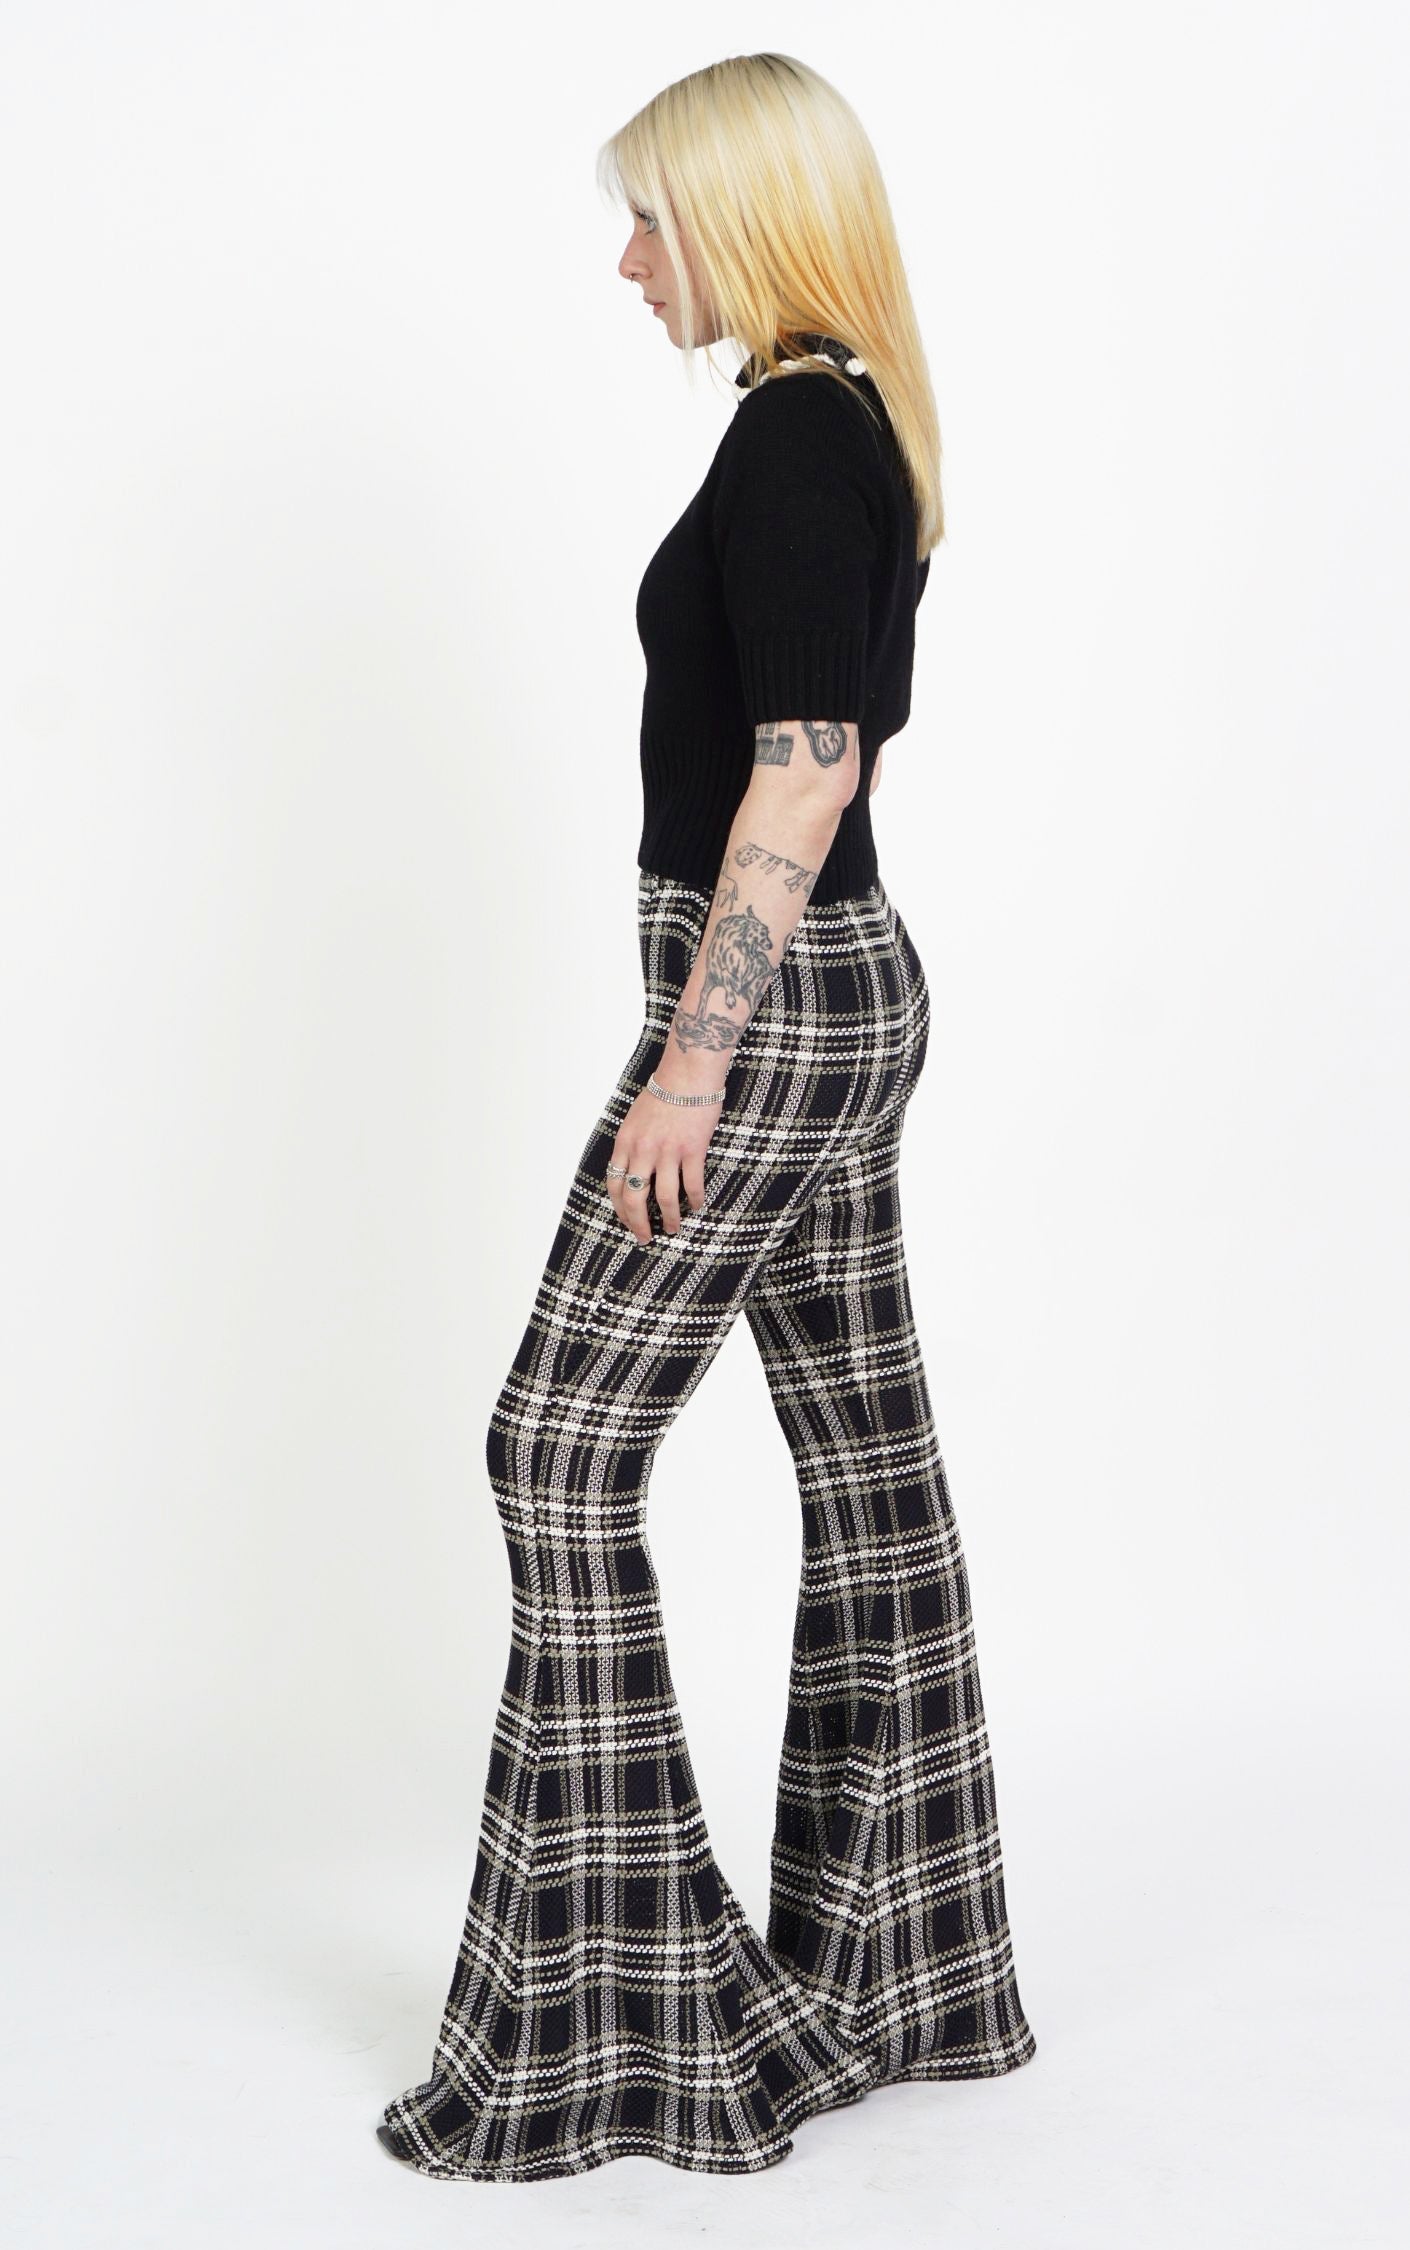 BEAUFILLE Plaid Flared High Rise Pants resellum